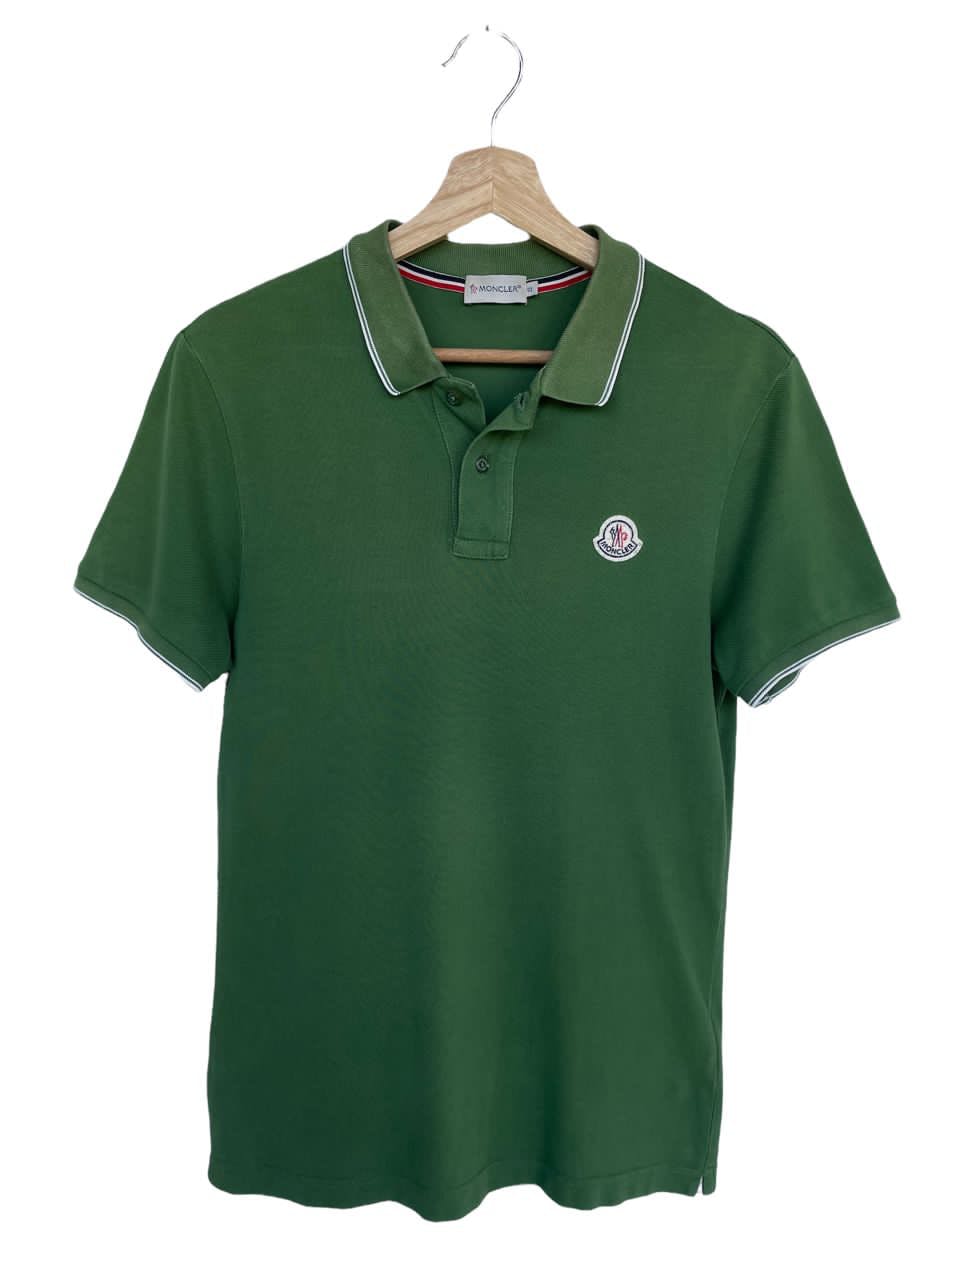 Authentic!! Moncler Ringer Button up Polo Shirt - 1